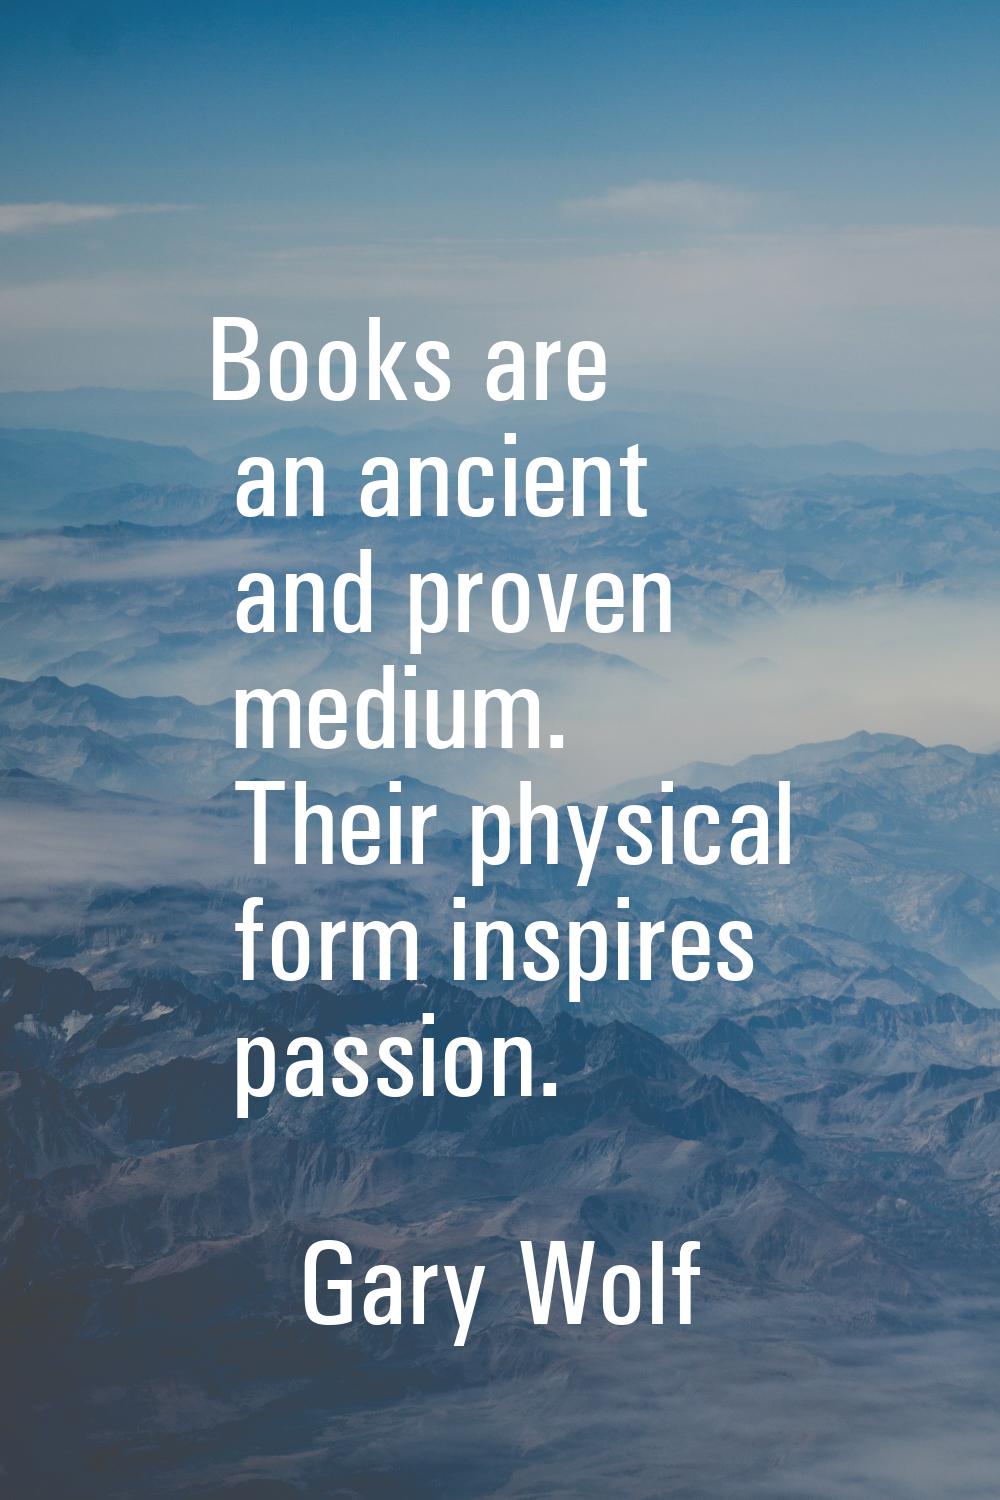 Books are an ancient and proven medium. Their physical form inspires passion.